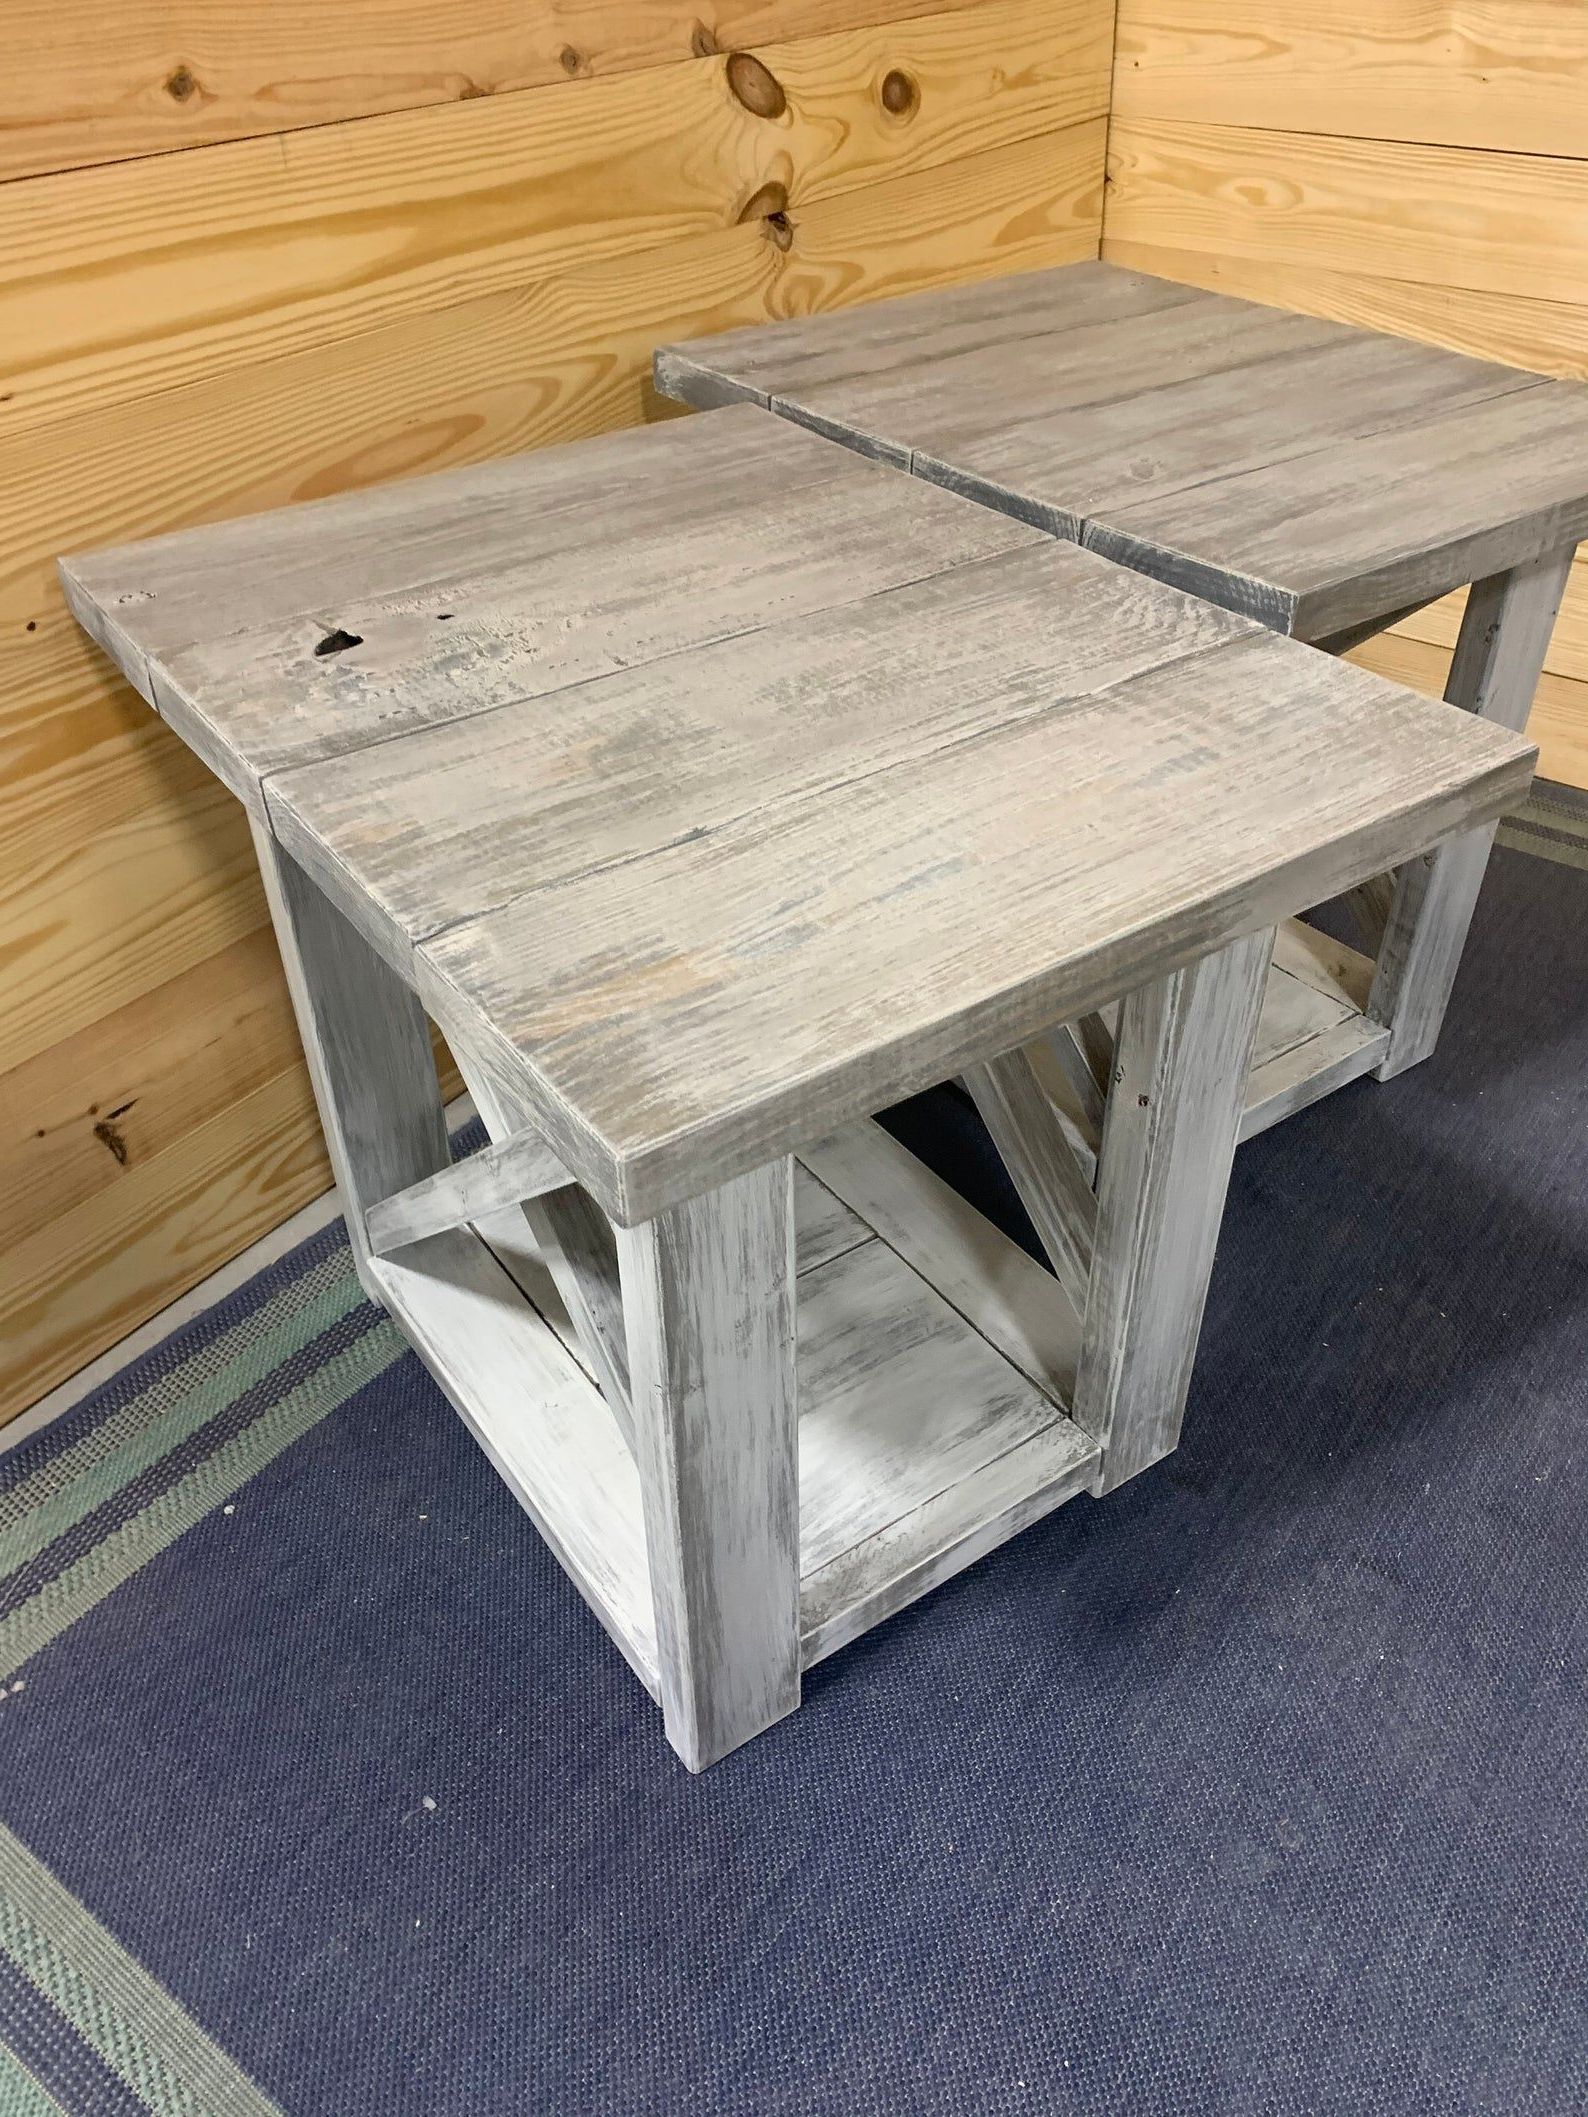 Long Rustic Farmhouse End Tables Gray White Wash Top With With Regard To Most Popular Oceanside White Washed Coffee Tables (View 10 of 20)